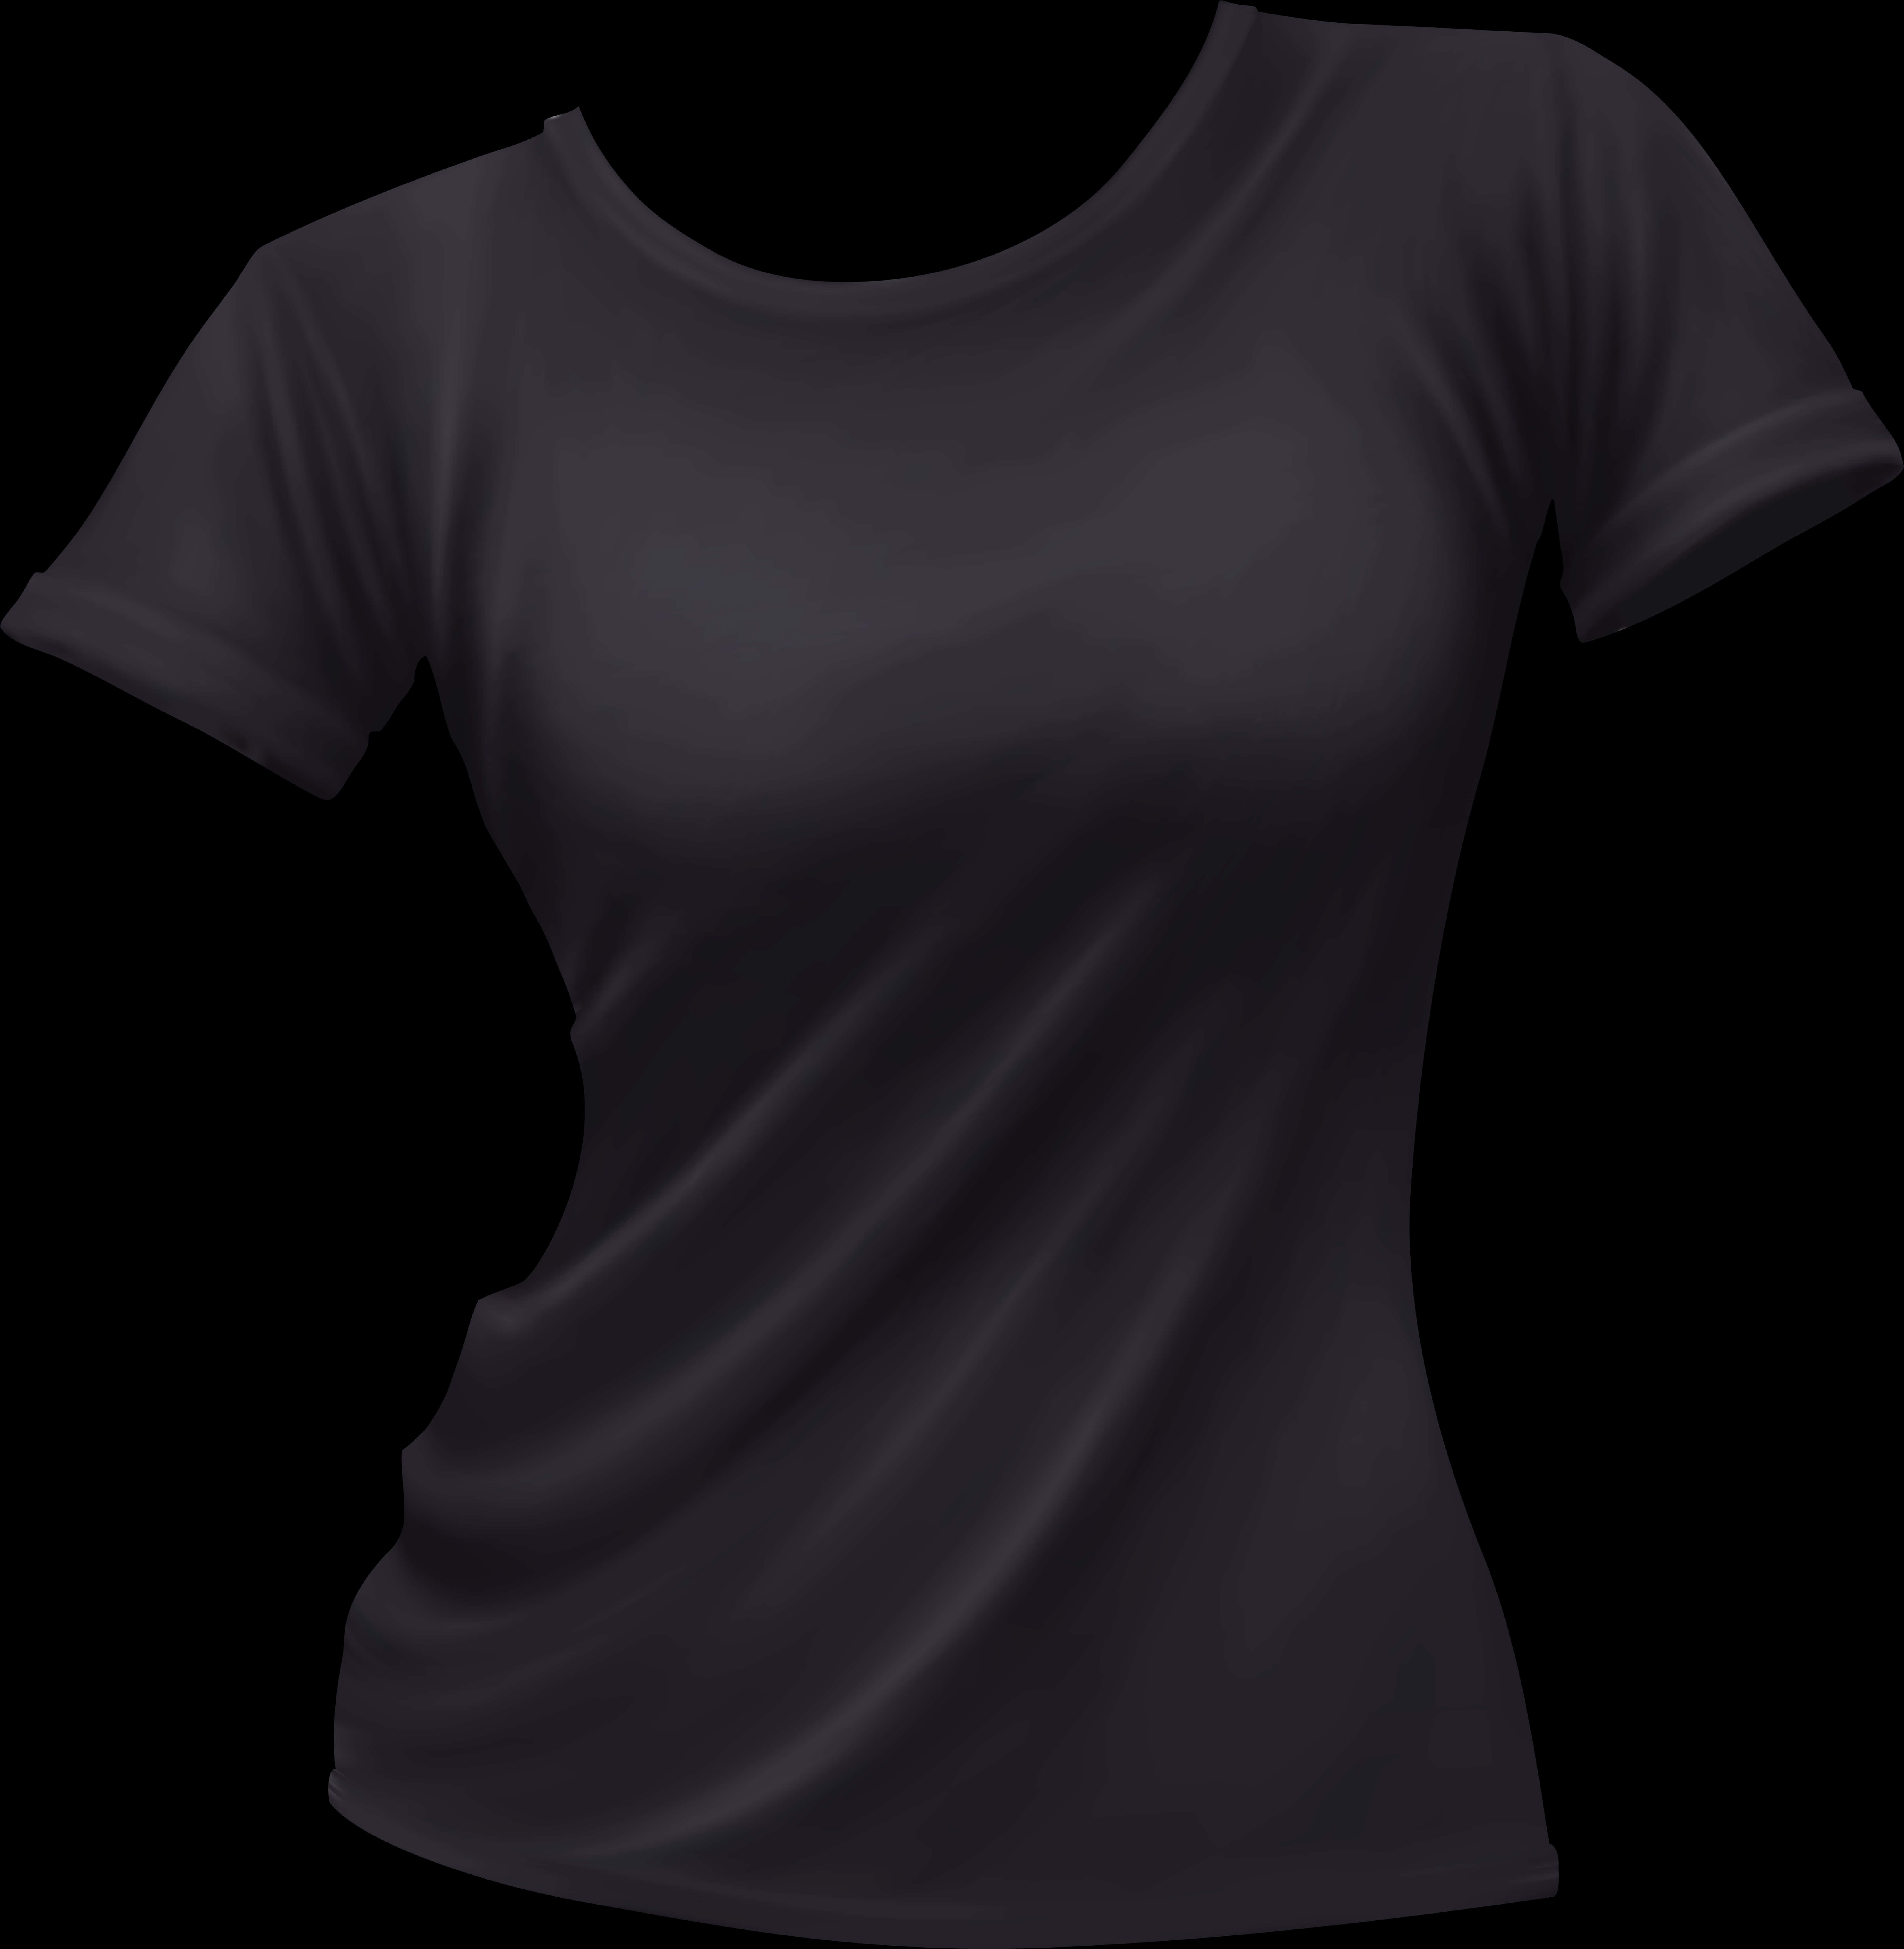 A Black Shirt With A Black Background